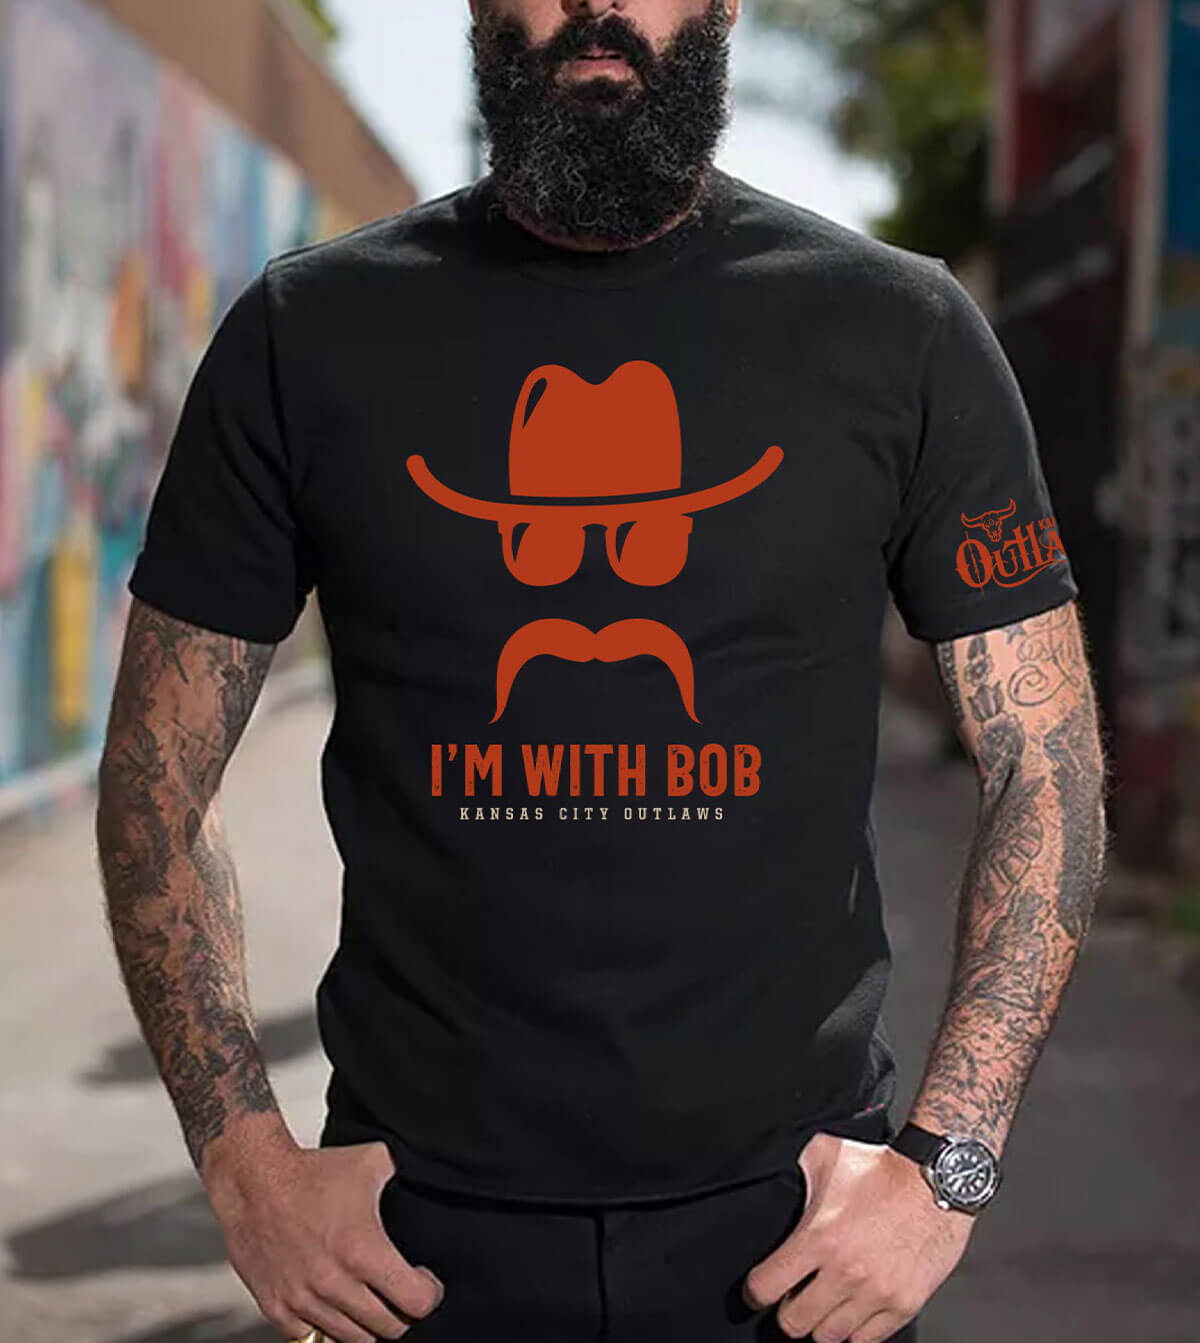 Front view of the dark grey "I'm with Bob" t-shirt.